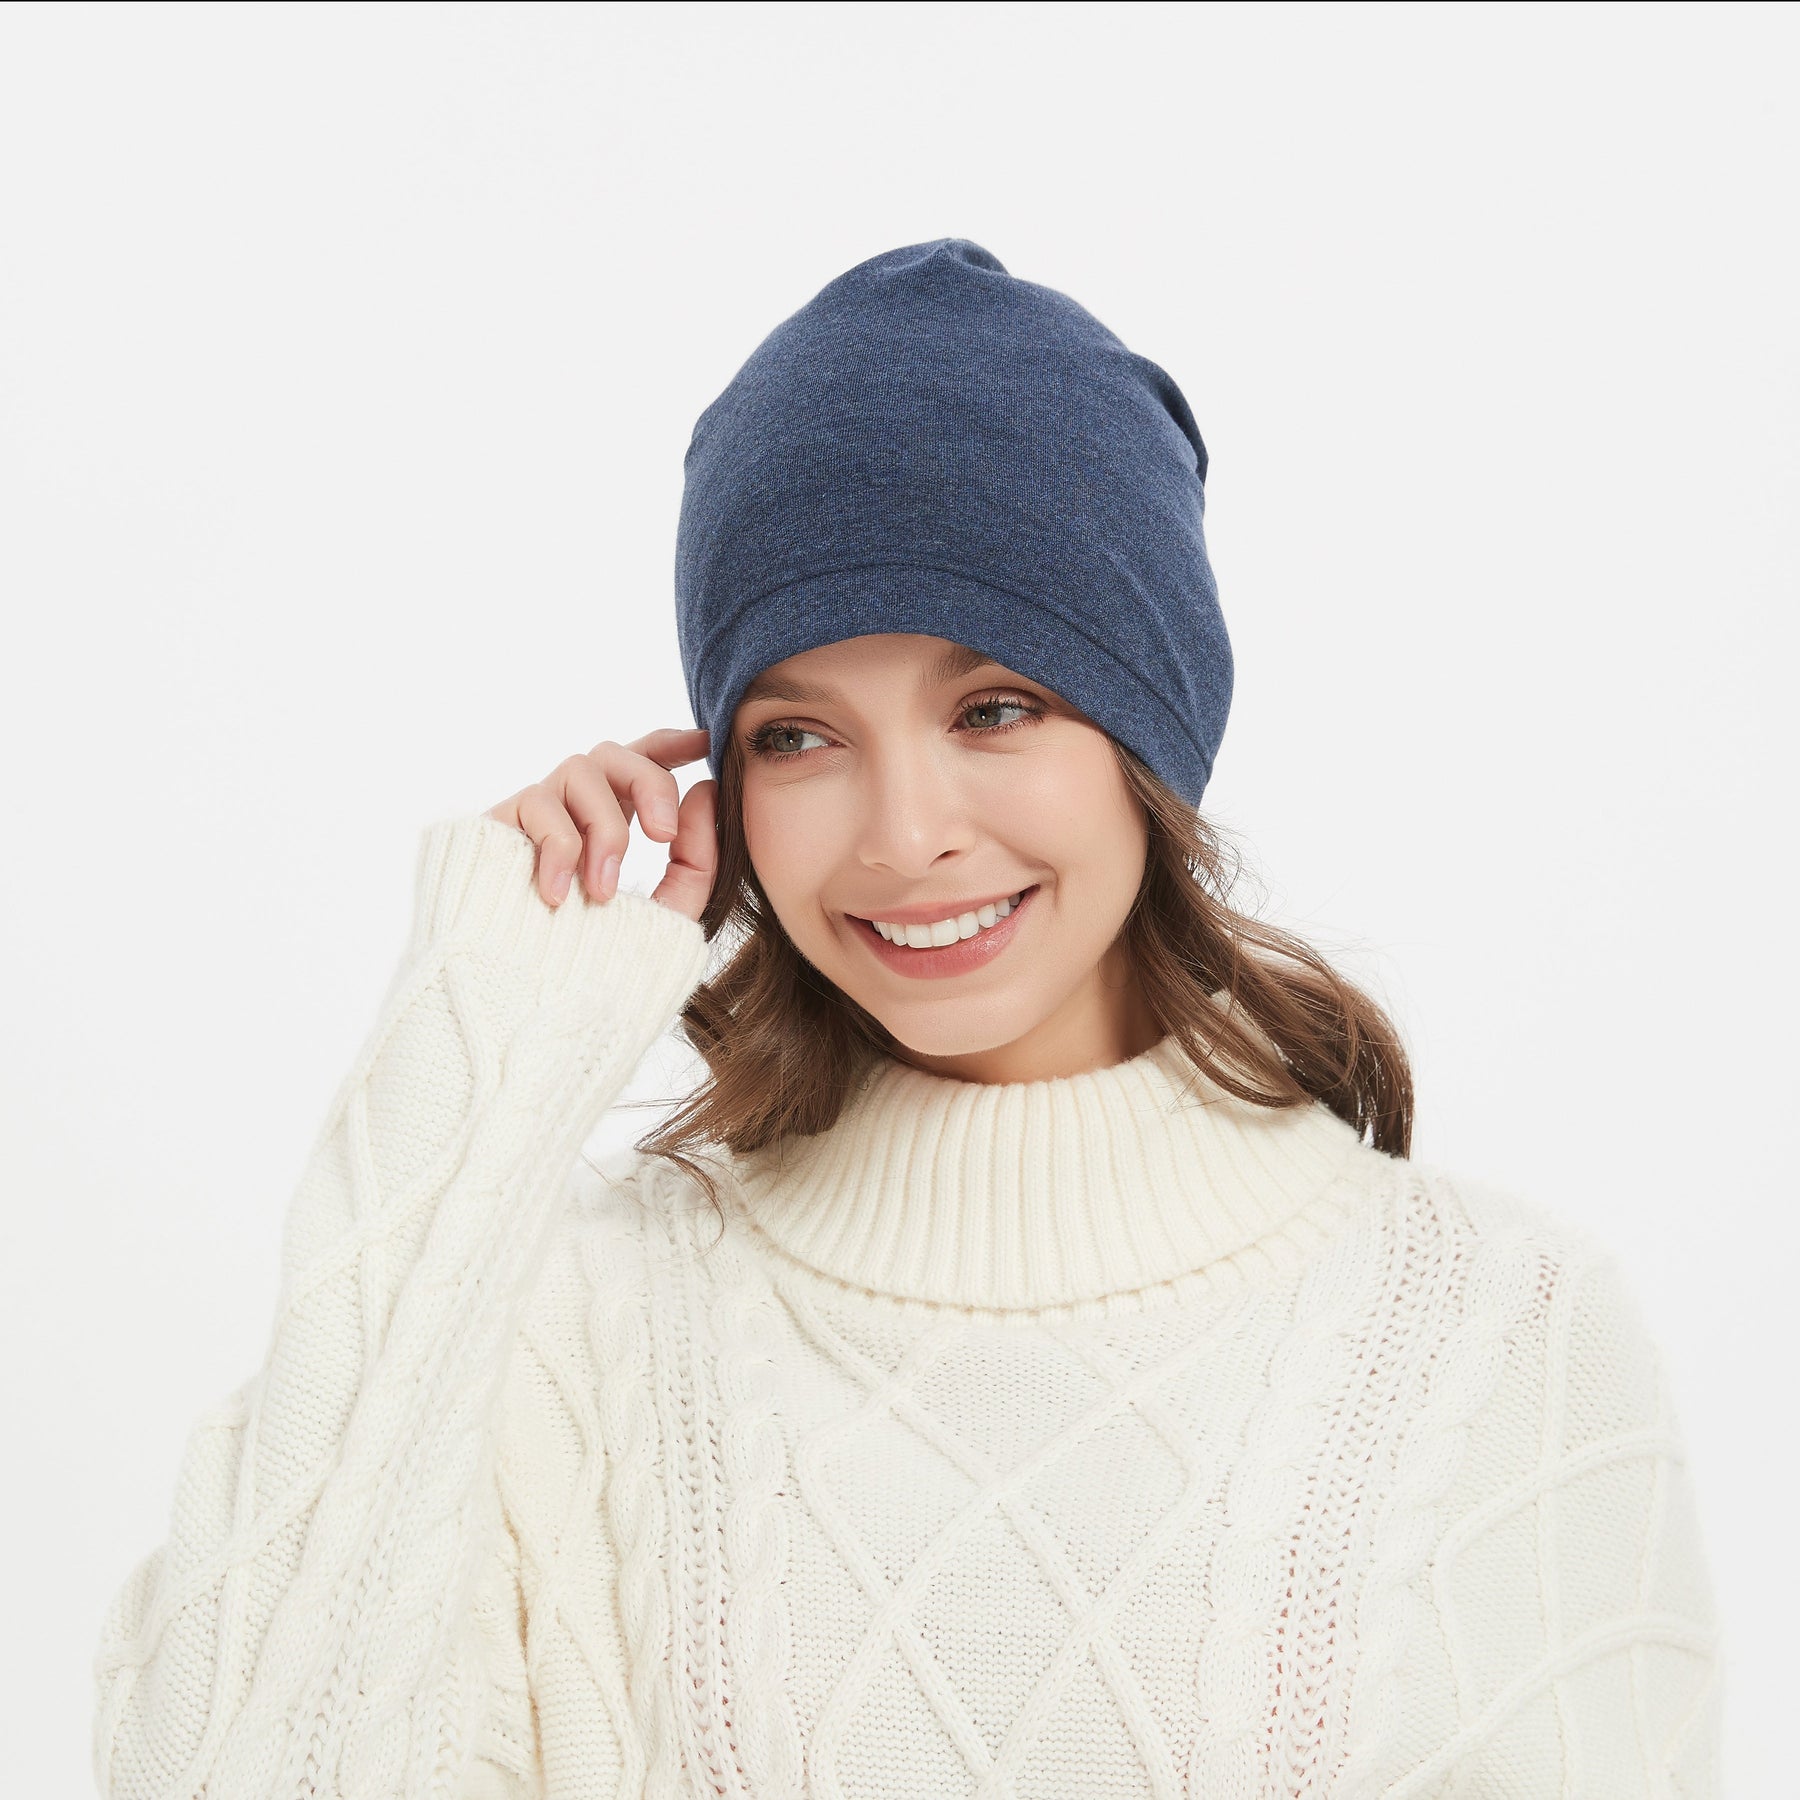 A women is happy about her new EMF beanie hat in heather navy color